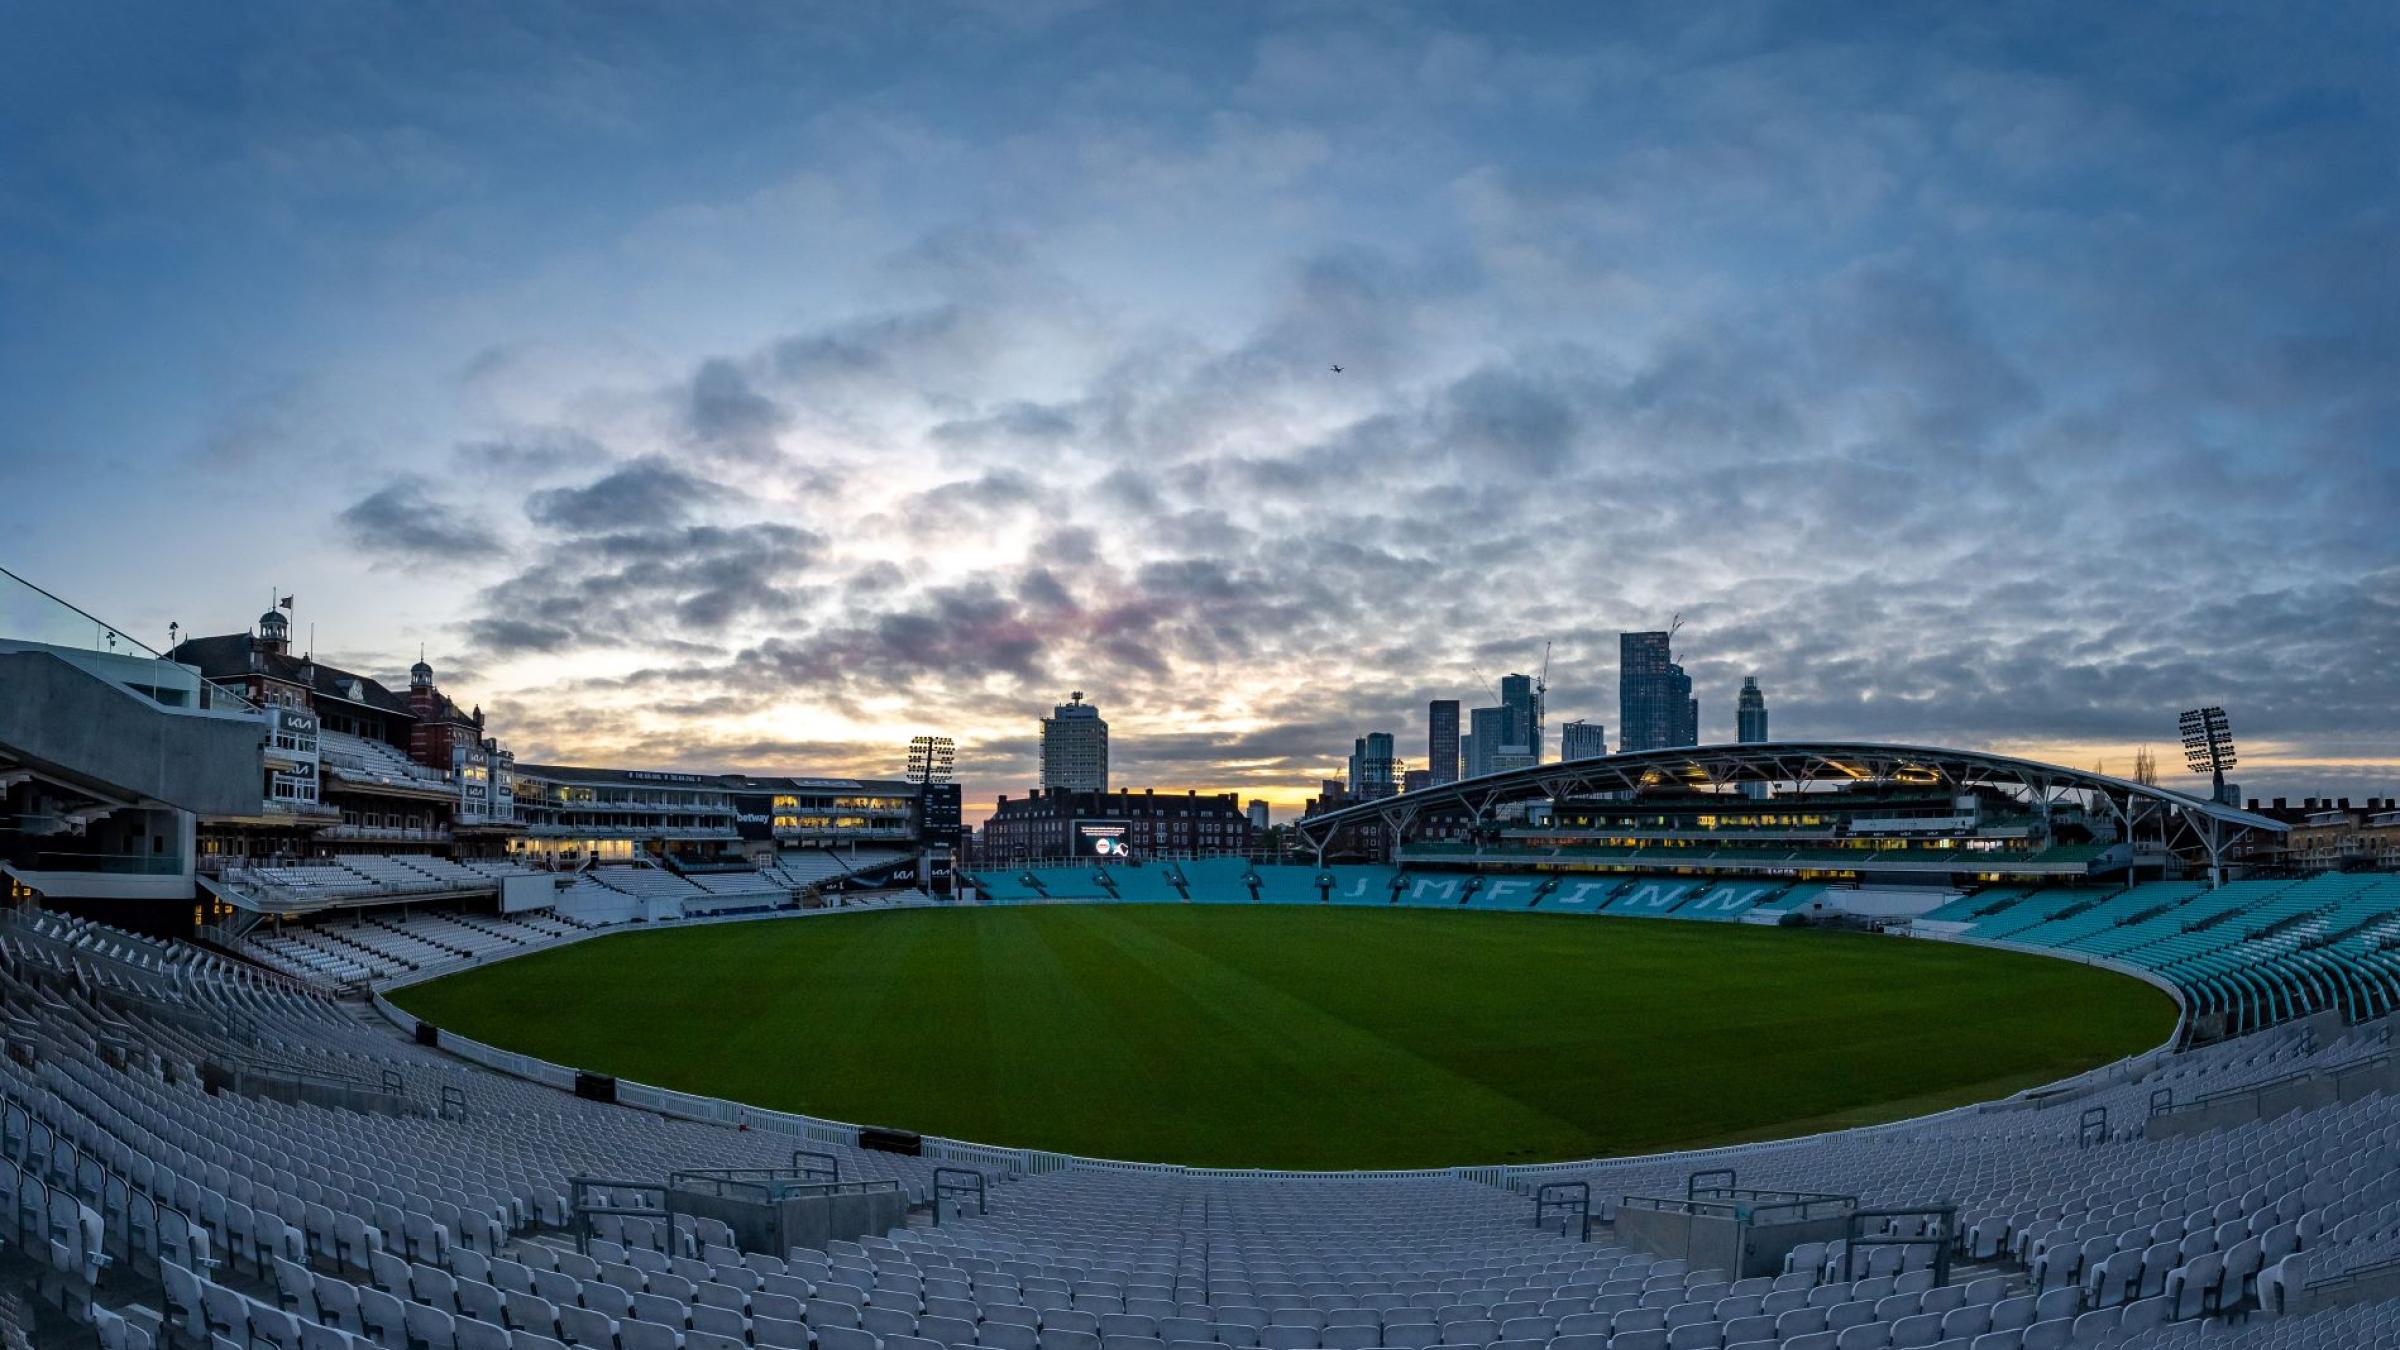 The Oval cricket ground